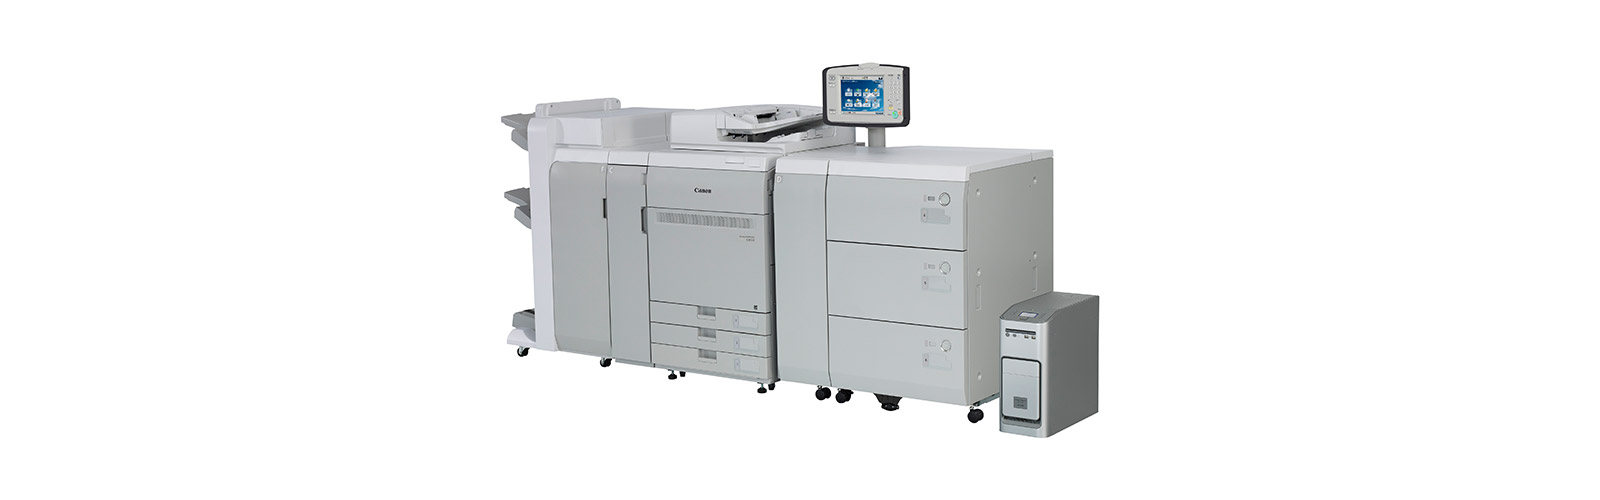 Canon imagePRESS C850 Production Print System